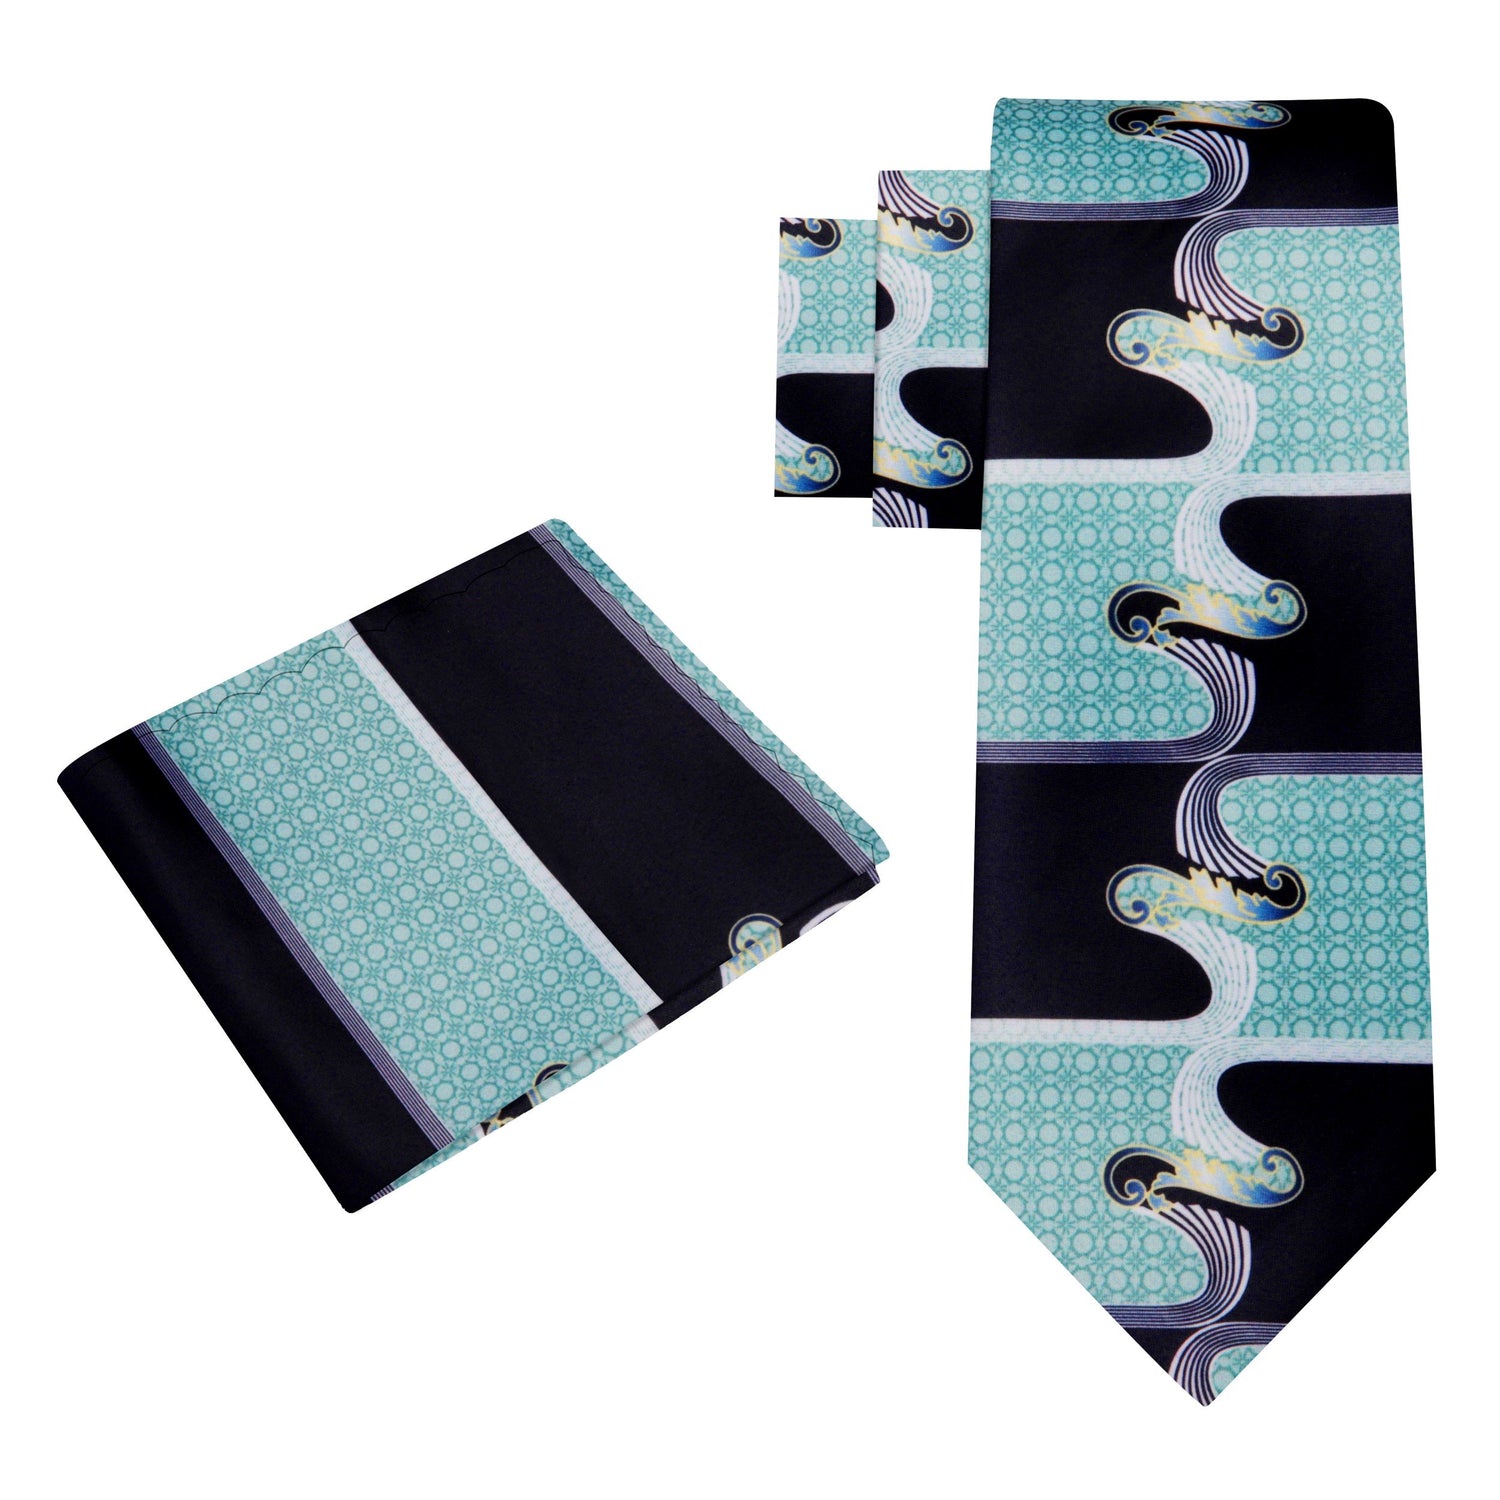 Alt View: Ice Black Abstract Waves Tie and Pocket Square